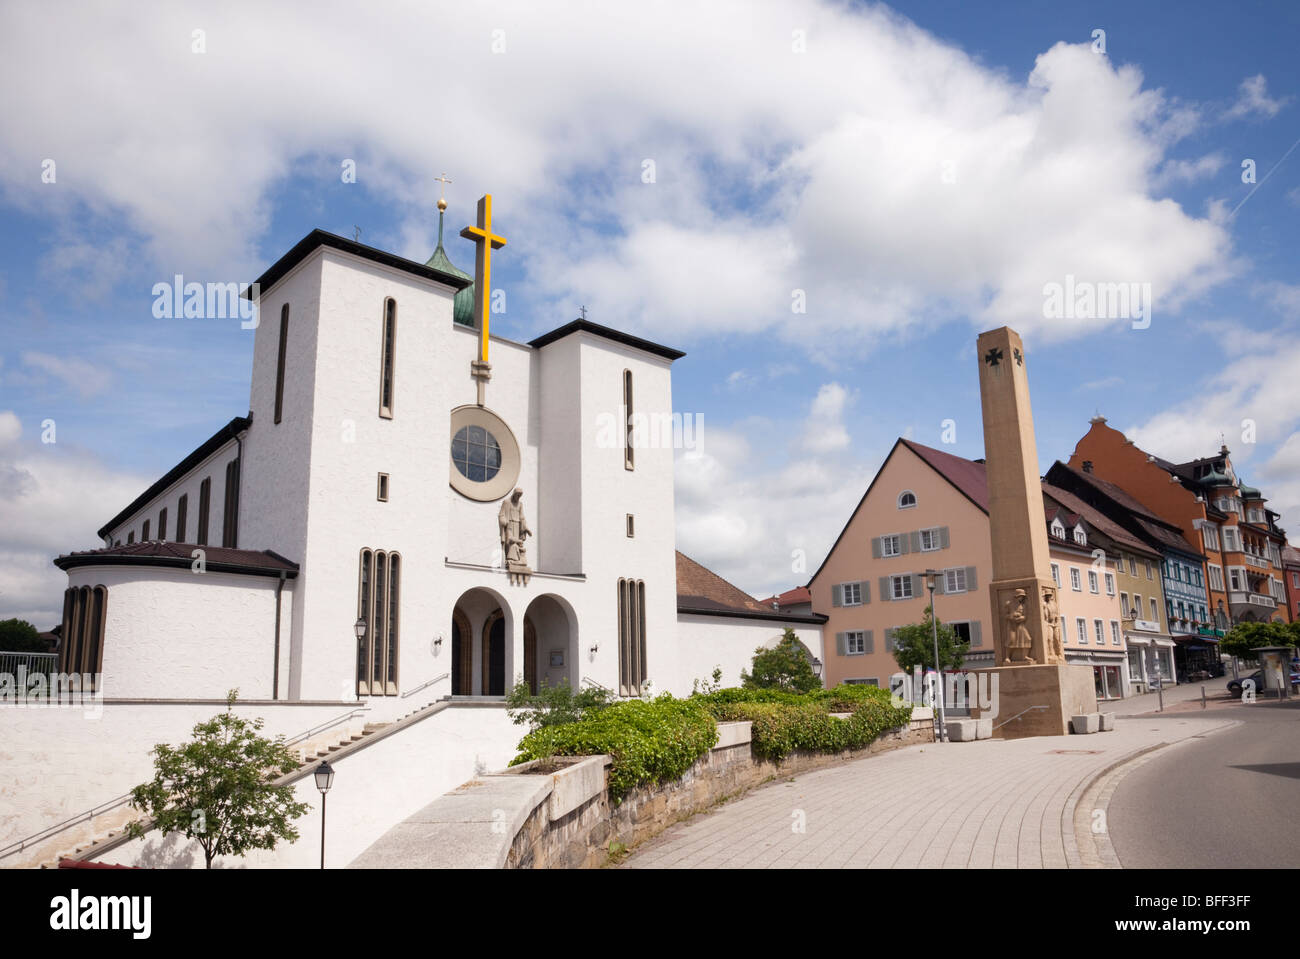 War memorial and large modern white church in historic small town of Stockach, Baden Wurttenburg, Germany, Europe. Stock Photo